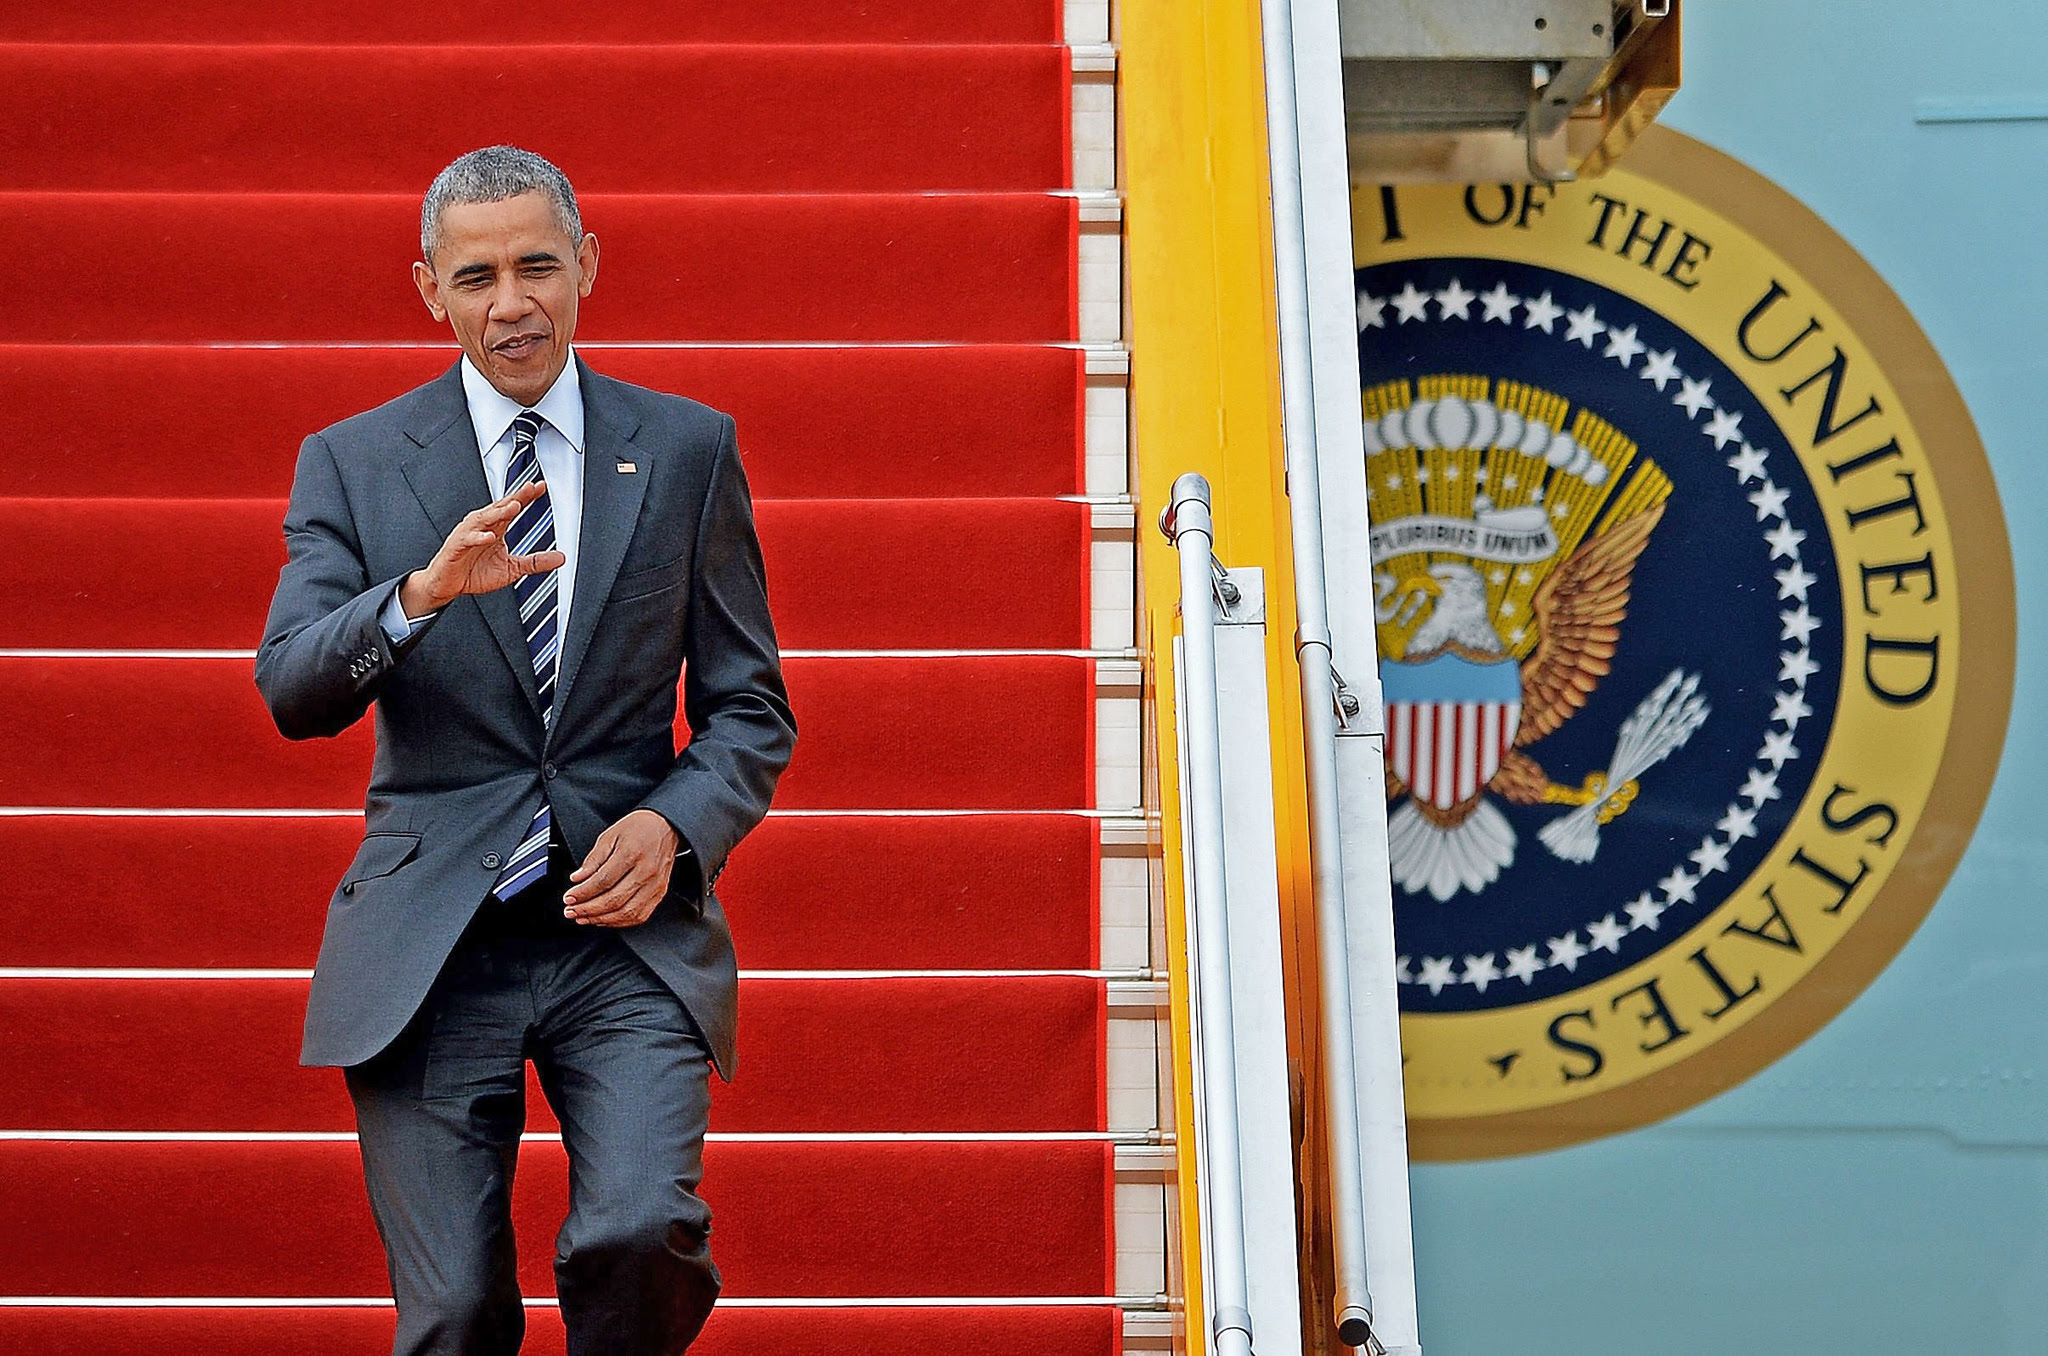 US President Barack Obama waves as he disembarks from Air Force One at the Tan Son Nhat airport in Ho Chi Minh City on May 24, 2016. Obama told communist Vietnam that basic human rights would not jeopardise its stability, in an impassioned appeal for the one-party state to abandon authoritarianism. / AFP PHOTO / CHRISTOPHE ARCHAMBAULTCHRISTOPHE ARCHAMBAULT/AFP/Getty Images